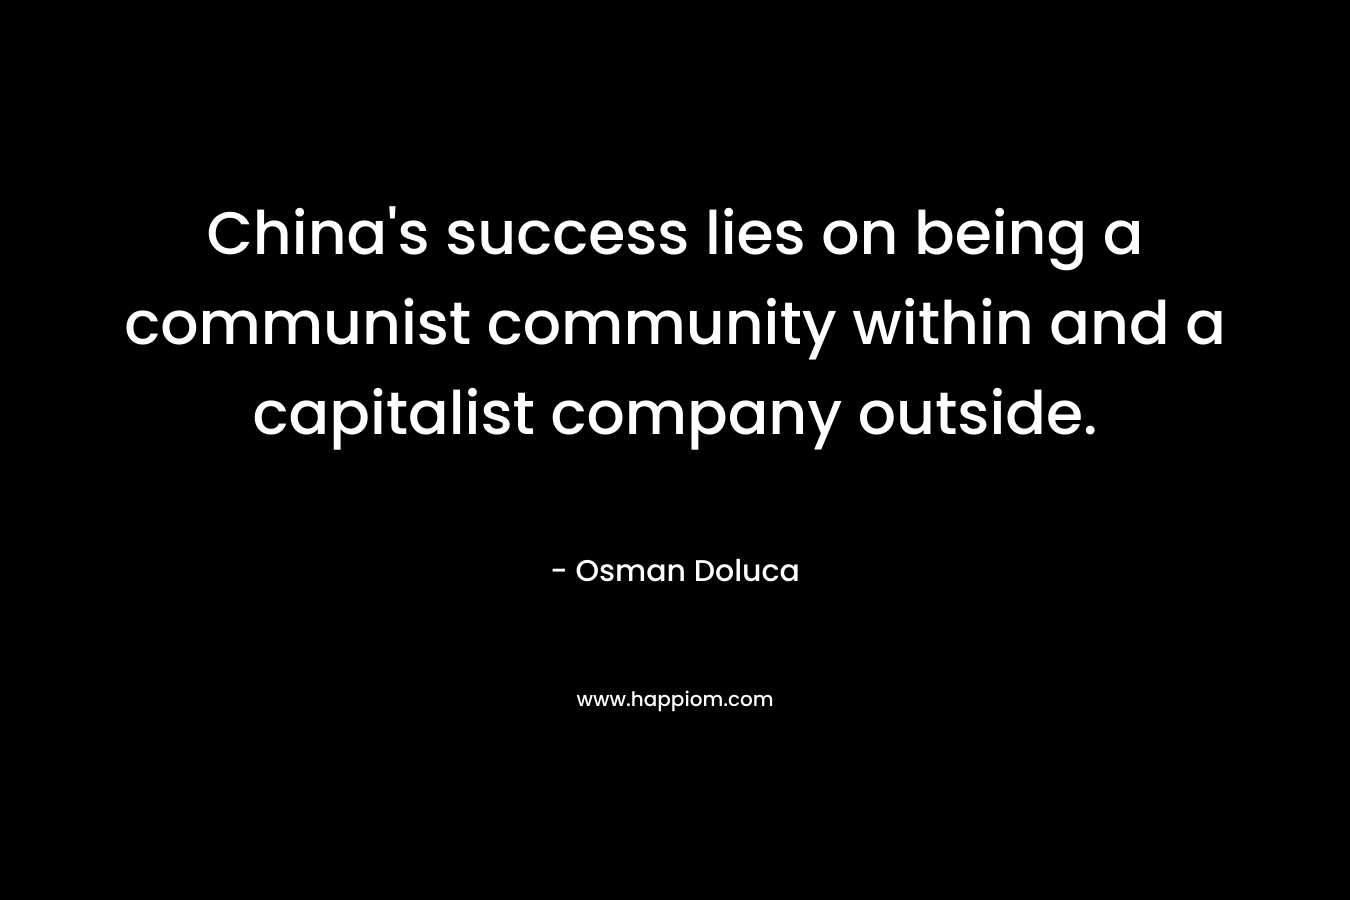 China's success lies on being a communist community within and a capitalist company outside.